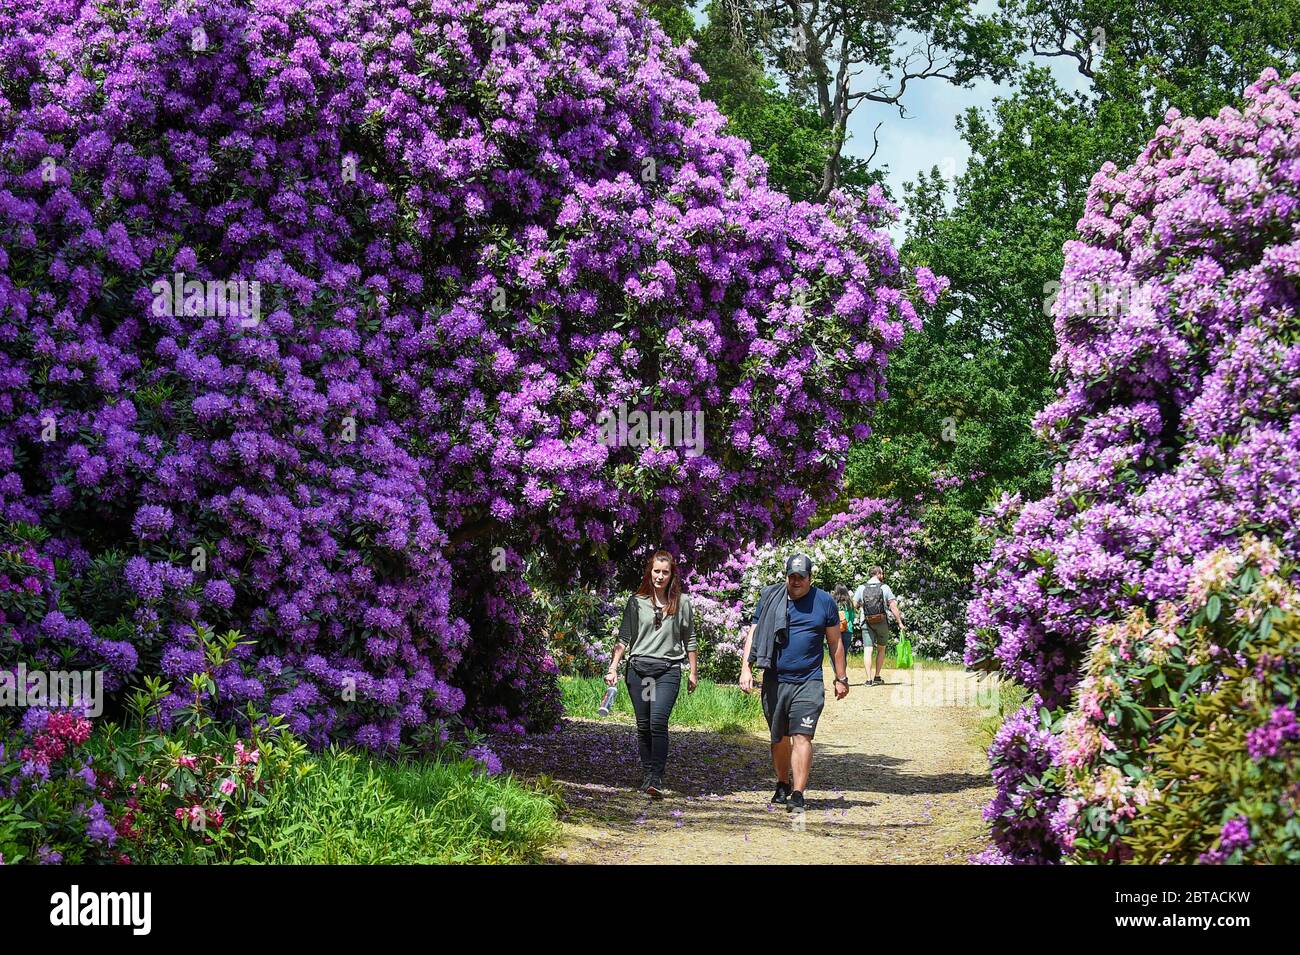 Iver, UK.  24 May 2020.  UK Weather: Visitors view the rhododendrons flowering during warm weather in the Temple Gardens of Langley Park, now open to the public again as the UK government has slightly relaxed coronavirus pandemic lockdown restrictions.  A former royal hunting ground, Langley Park has links to King Henry VIII, Queen Elizabeth I and Queen Victoria.  Each year, the masses of flowers bloom from March to June. Credit: Stephen Chung / Alamy Live News Stock Photo